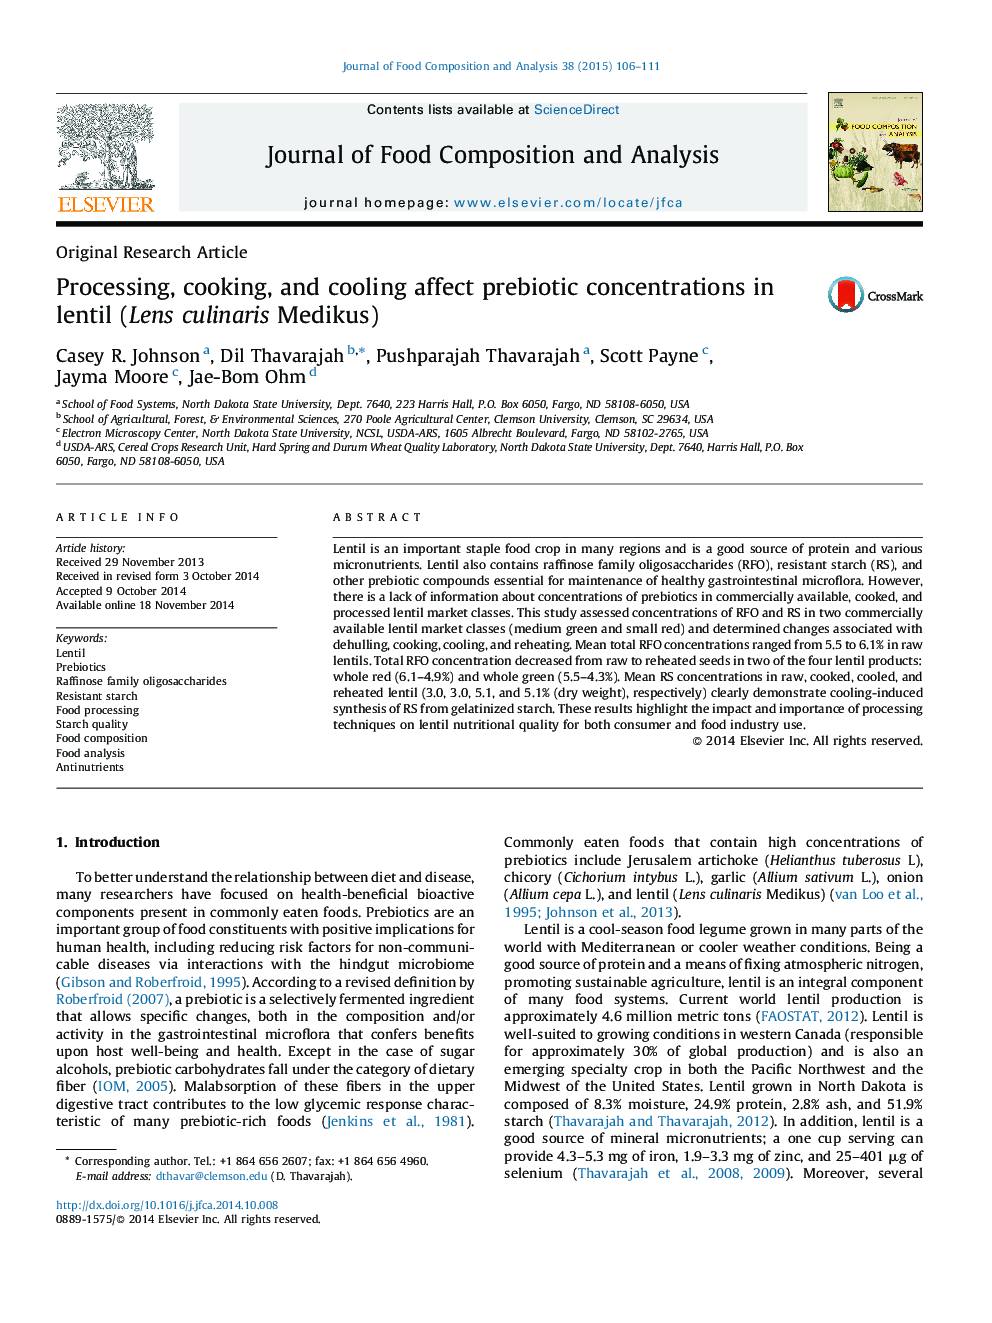 Processing, cooking, and cooling affect prebiotic concentrations in lentil (Lens culinaris Medikus)